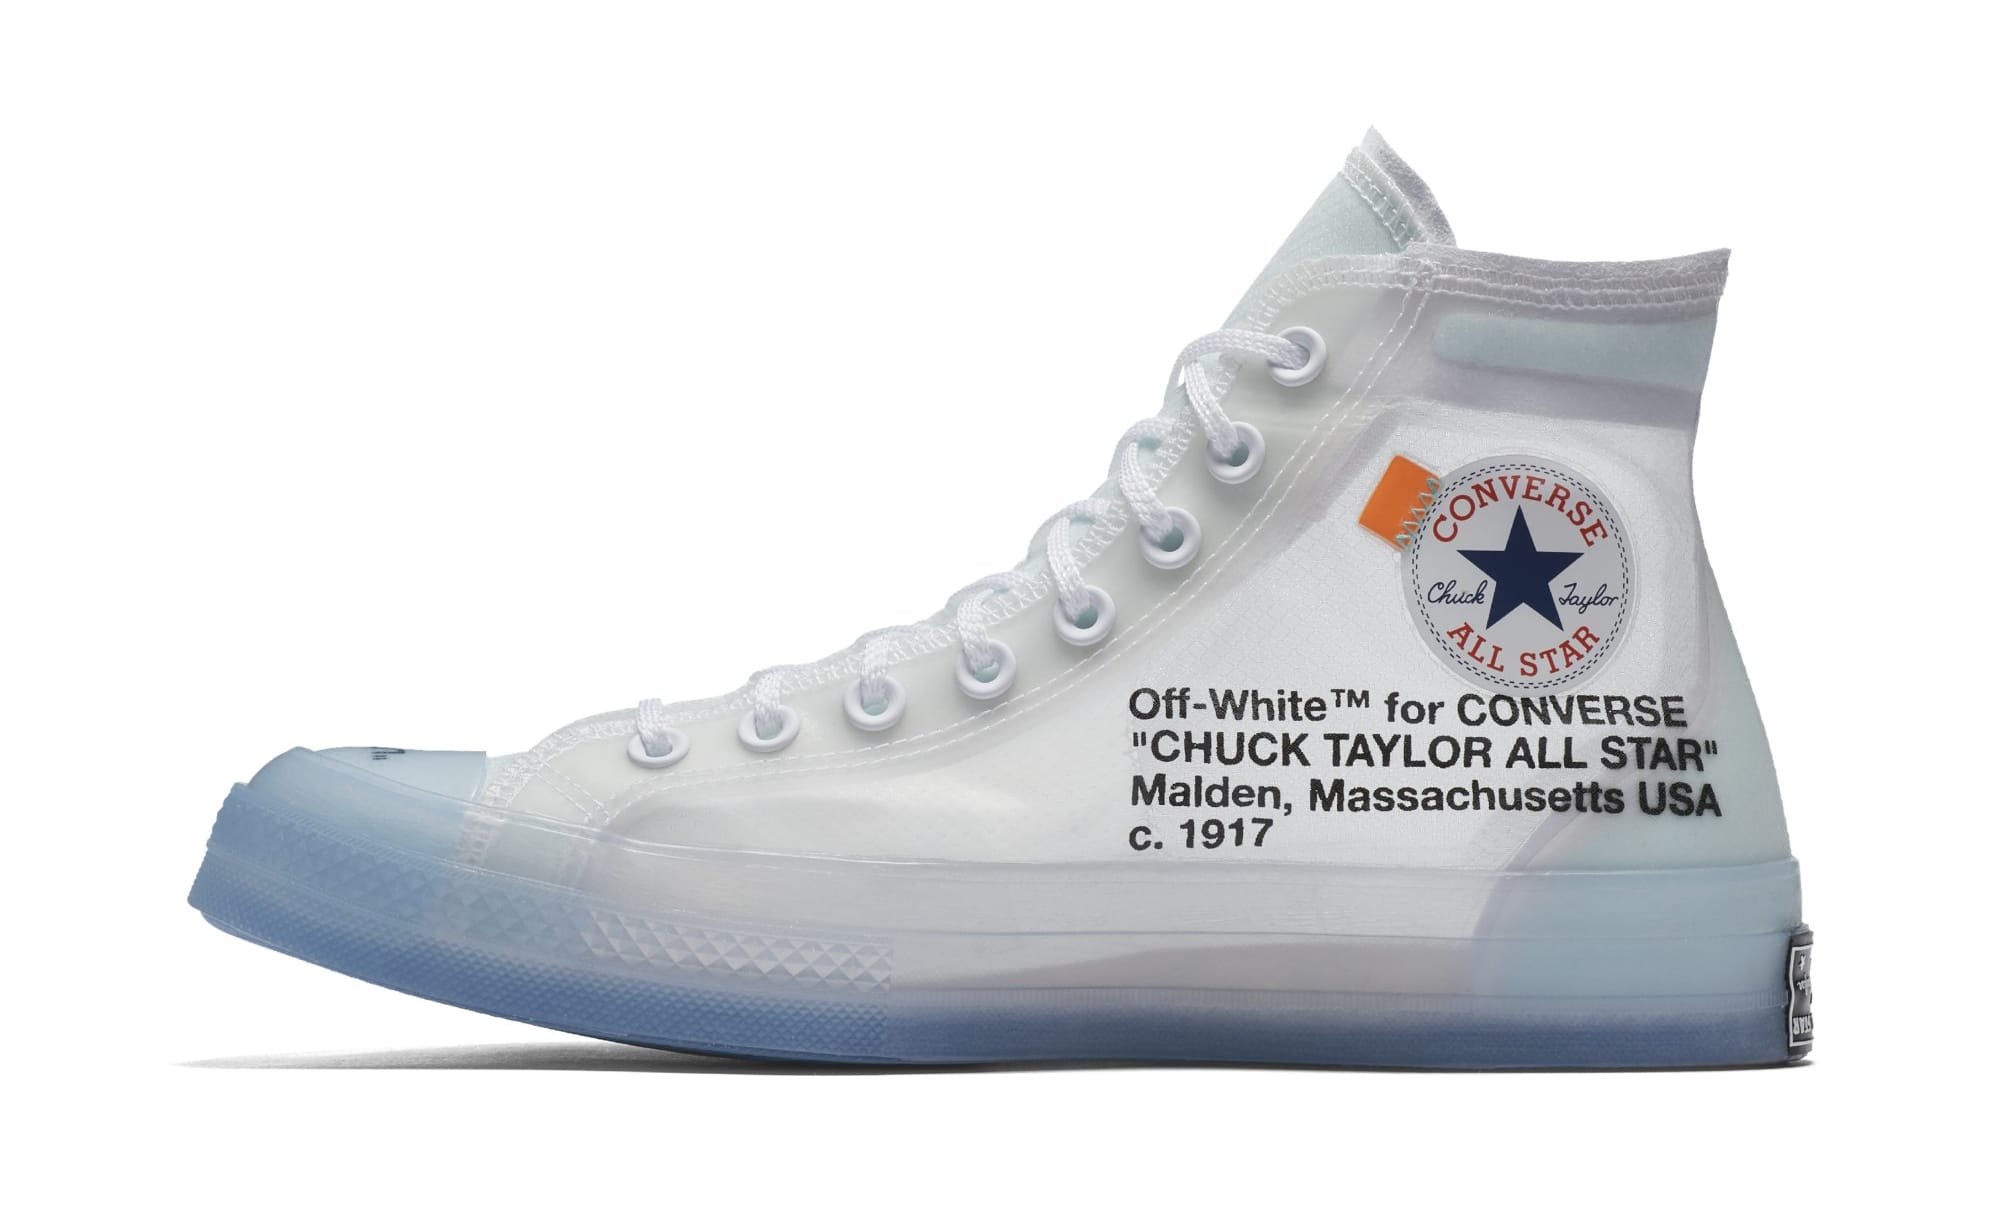 Off-White x Converse Chuck Taylor All Starc162204C-102 Release Date